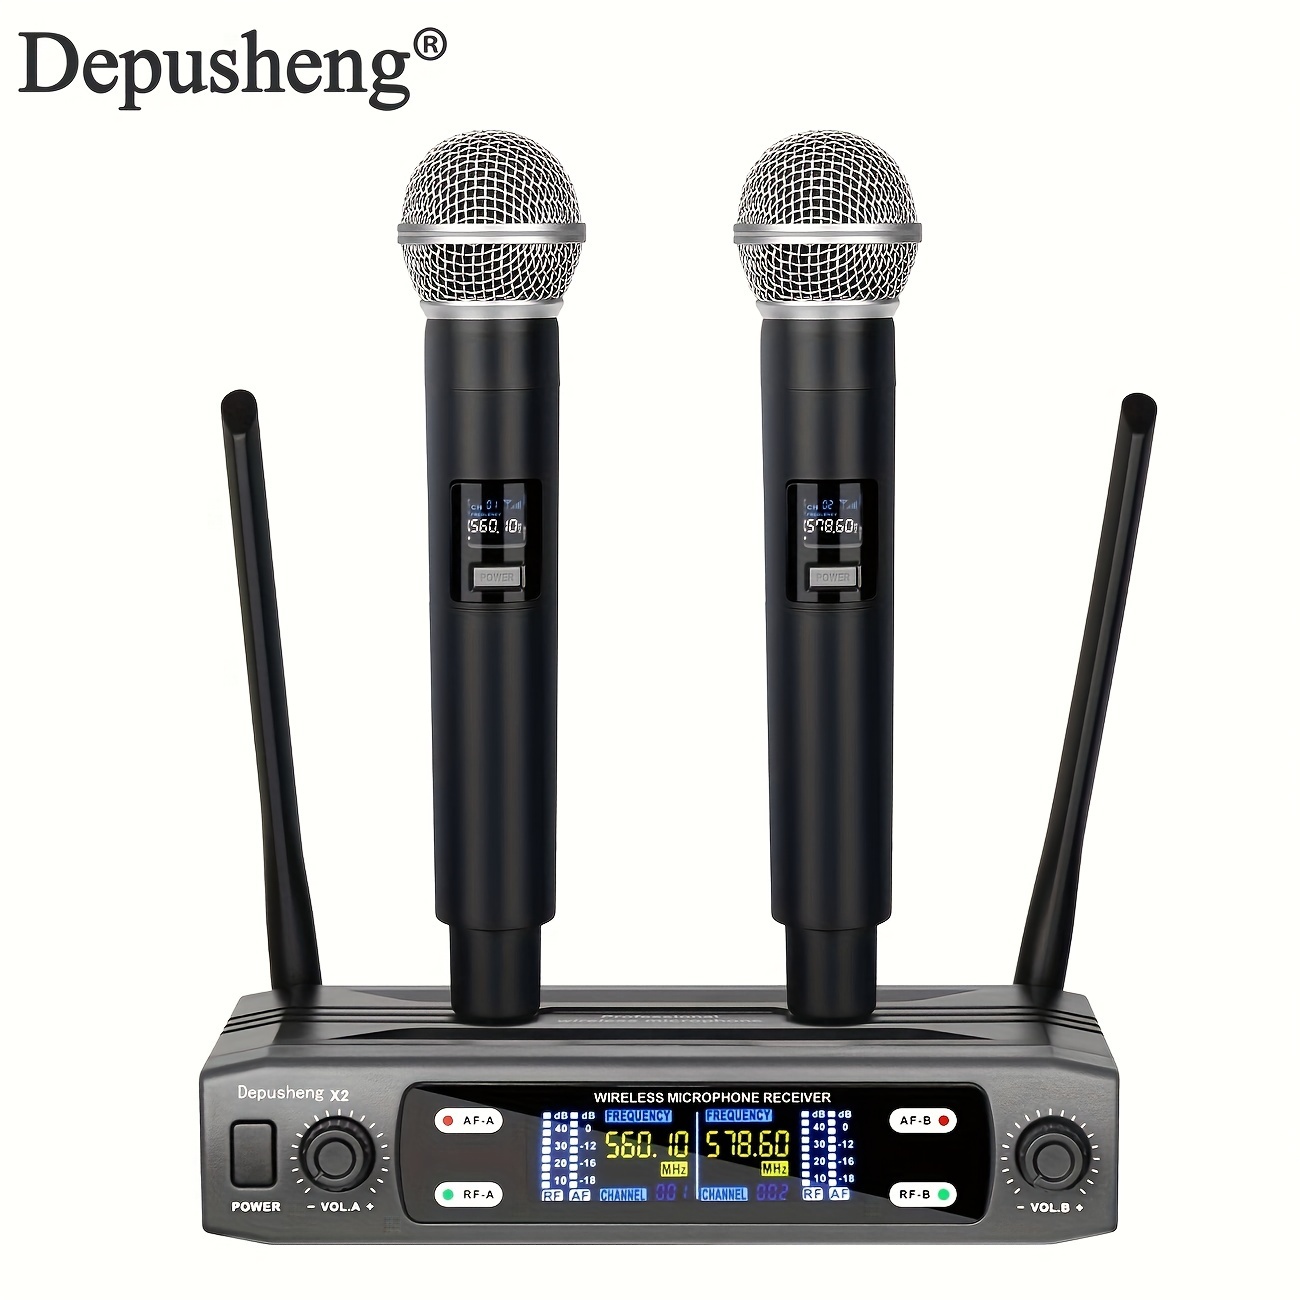 8 Metal Handheld Wireless System UHF Professional Stage Microphone System  Set